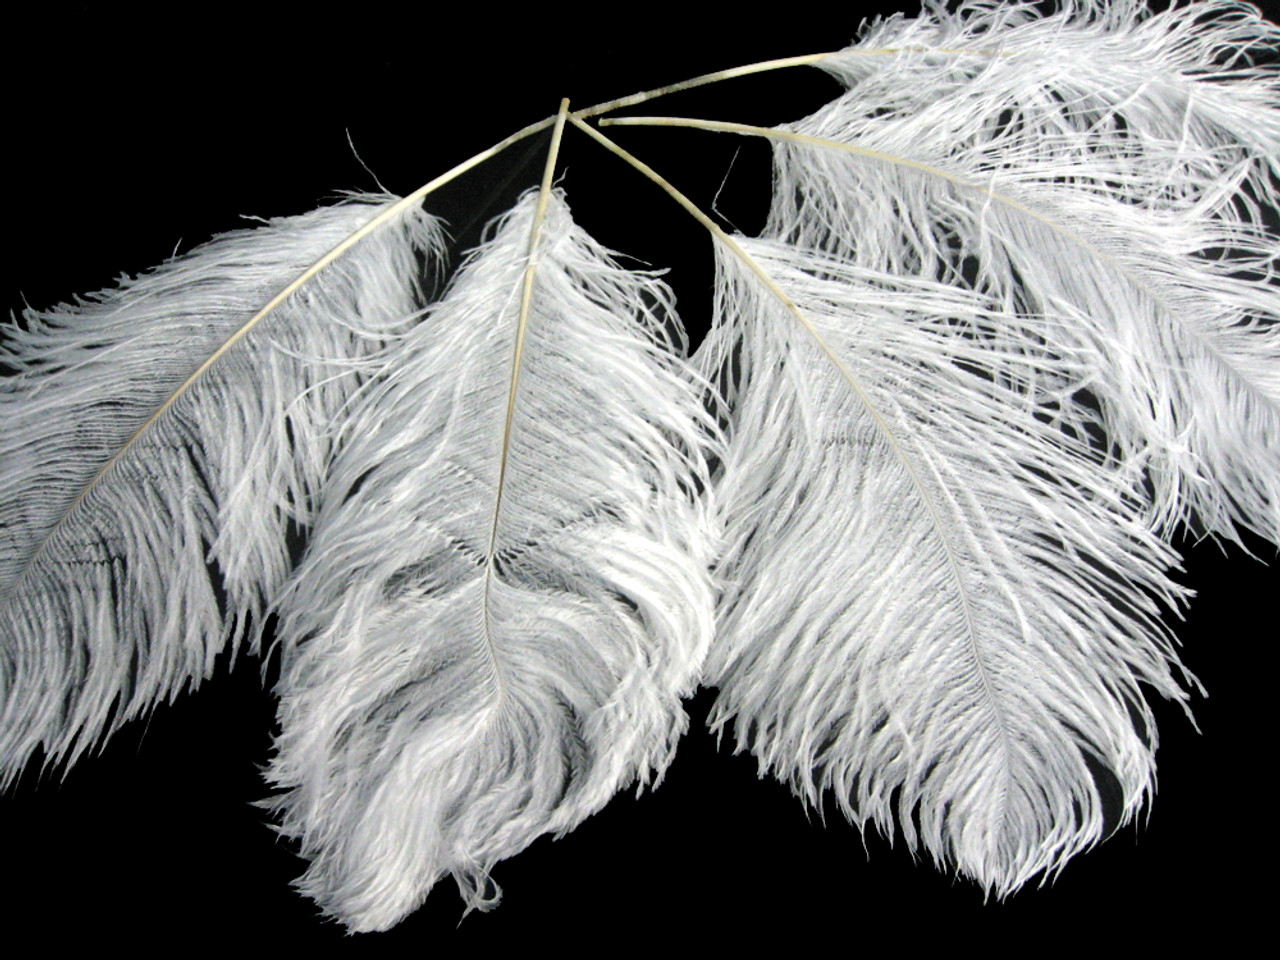 Moonlight Feather 50 Pieces - 12-16 White Ostrich Tail Centerpiece Costume Feathers Wedding Party